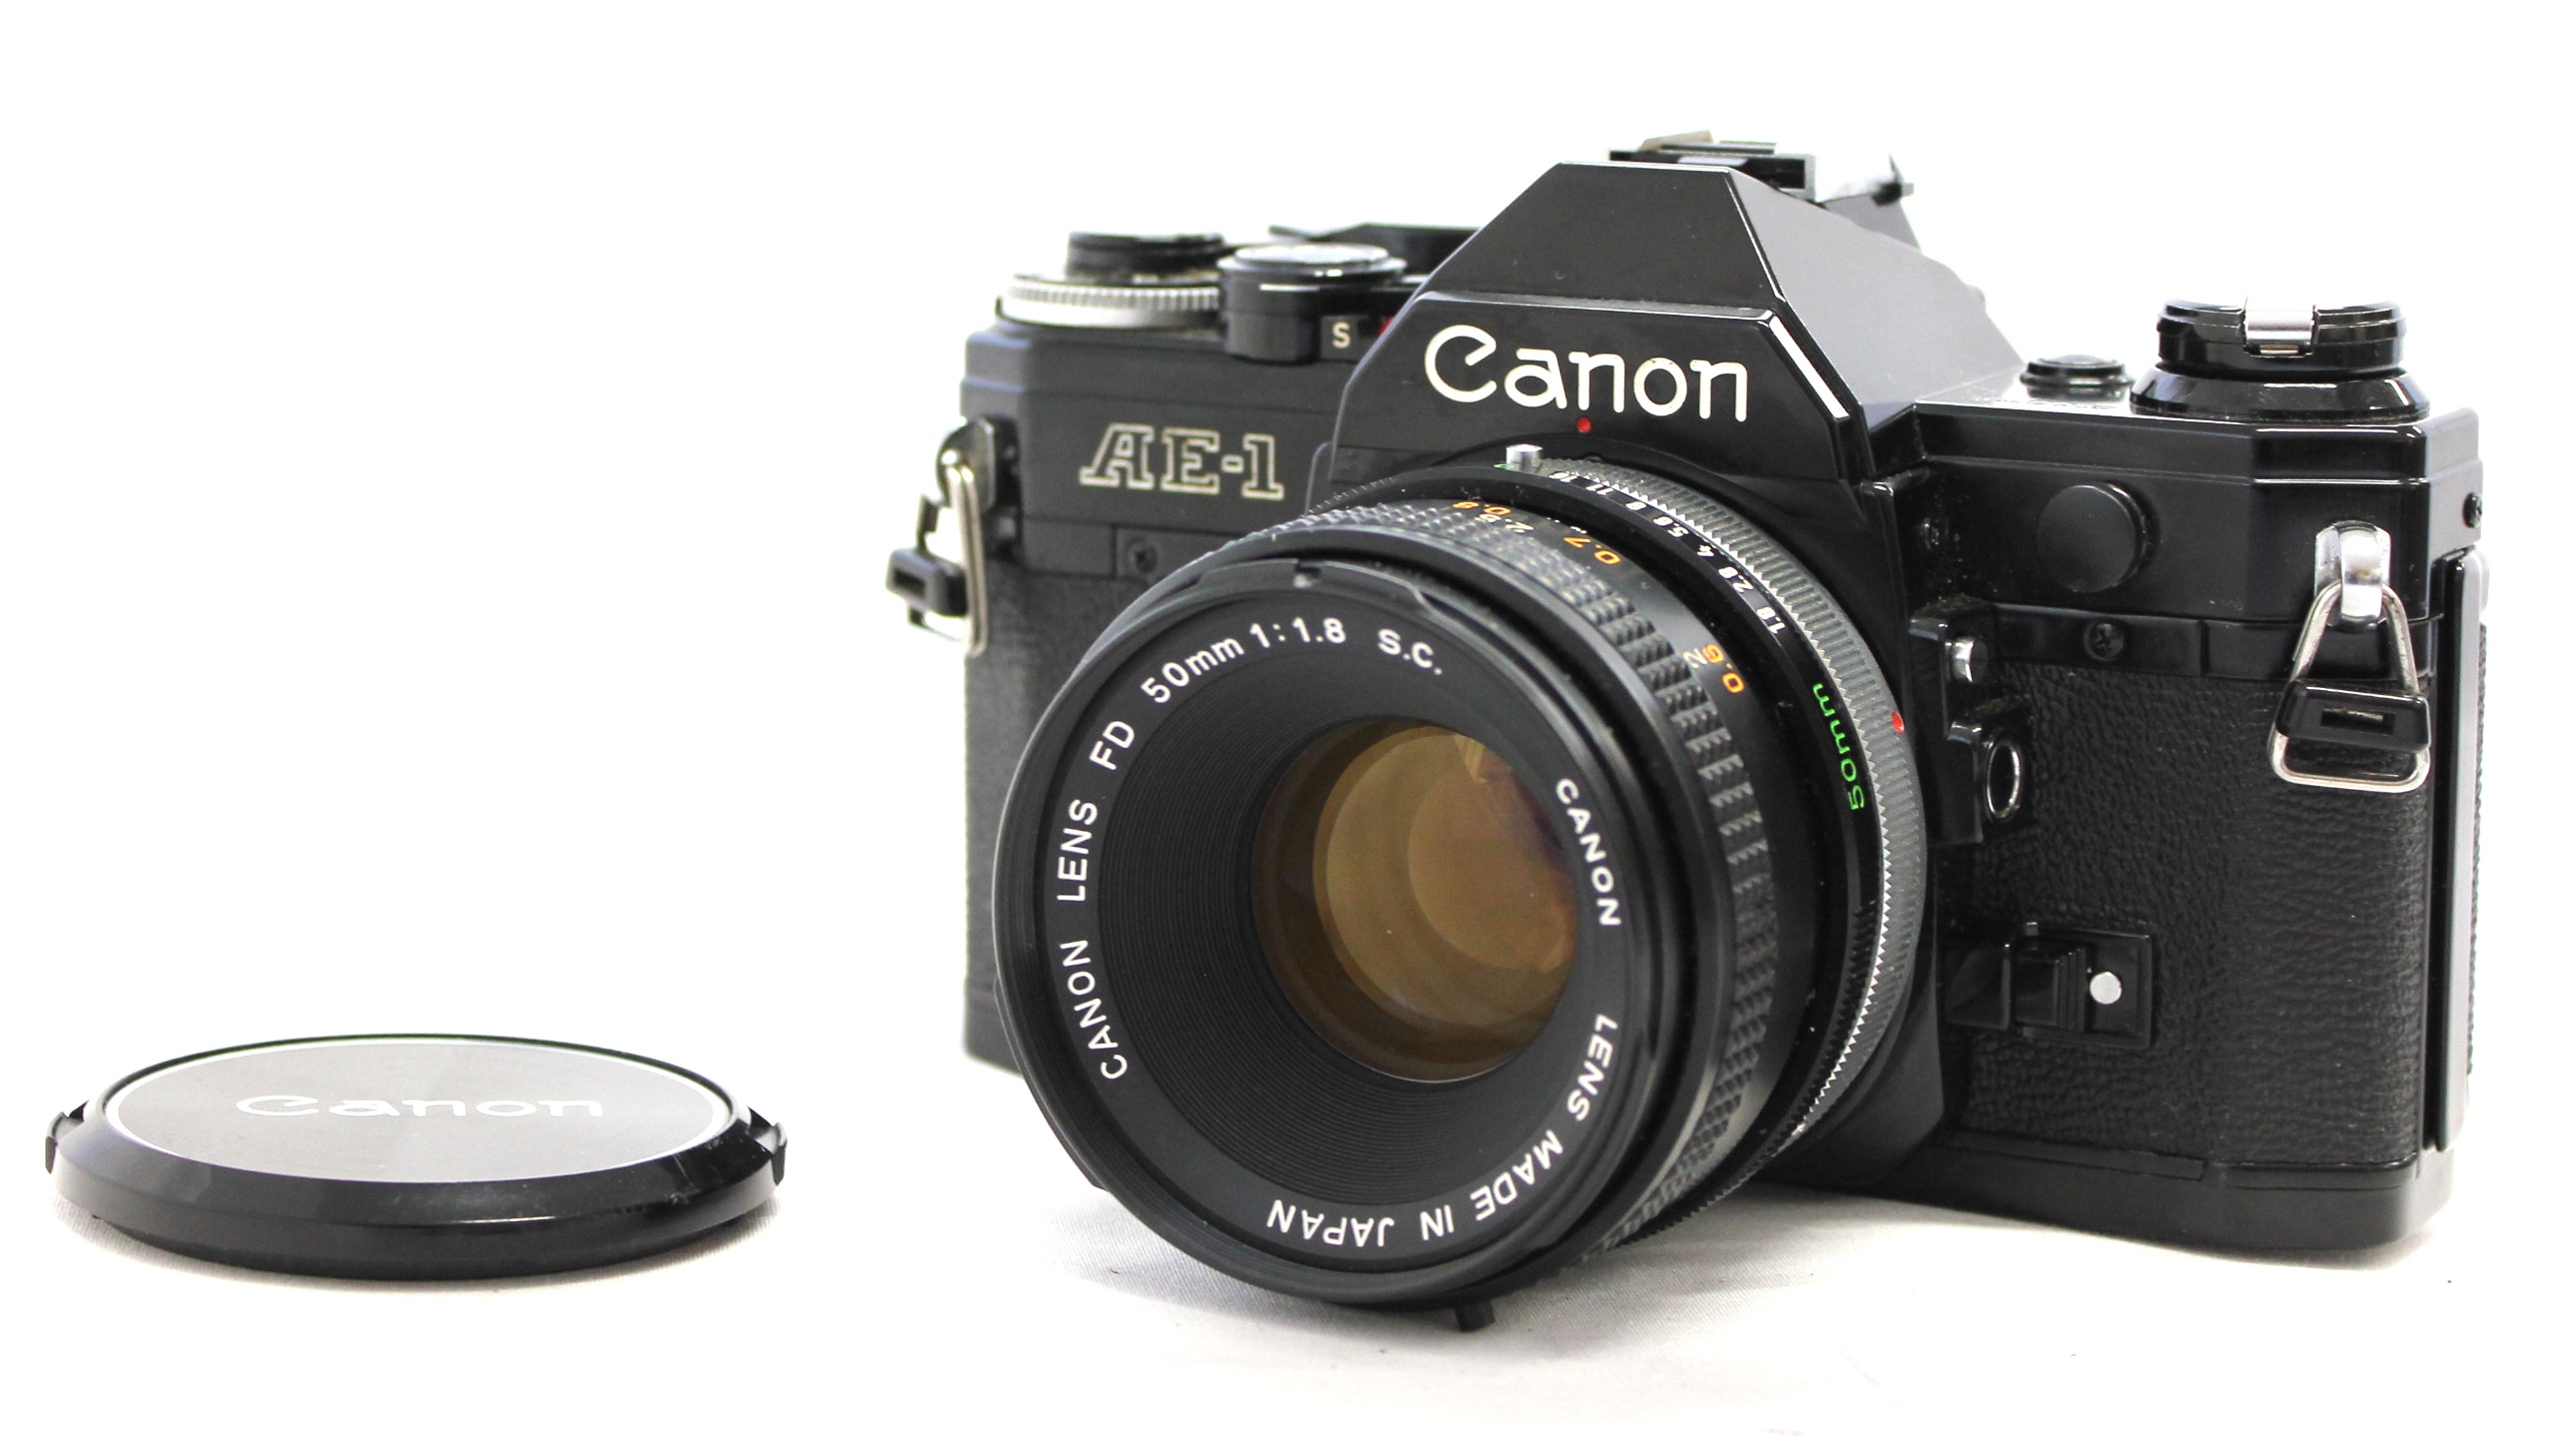 Japan Used Camera Shop | [Exc++++] Canon AE-1 35mm SLR Film Camera Black with FD 50mm F/1.8 S.C. Lens from Japan